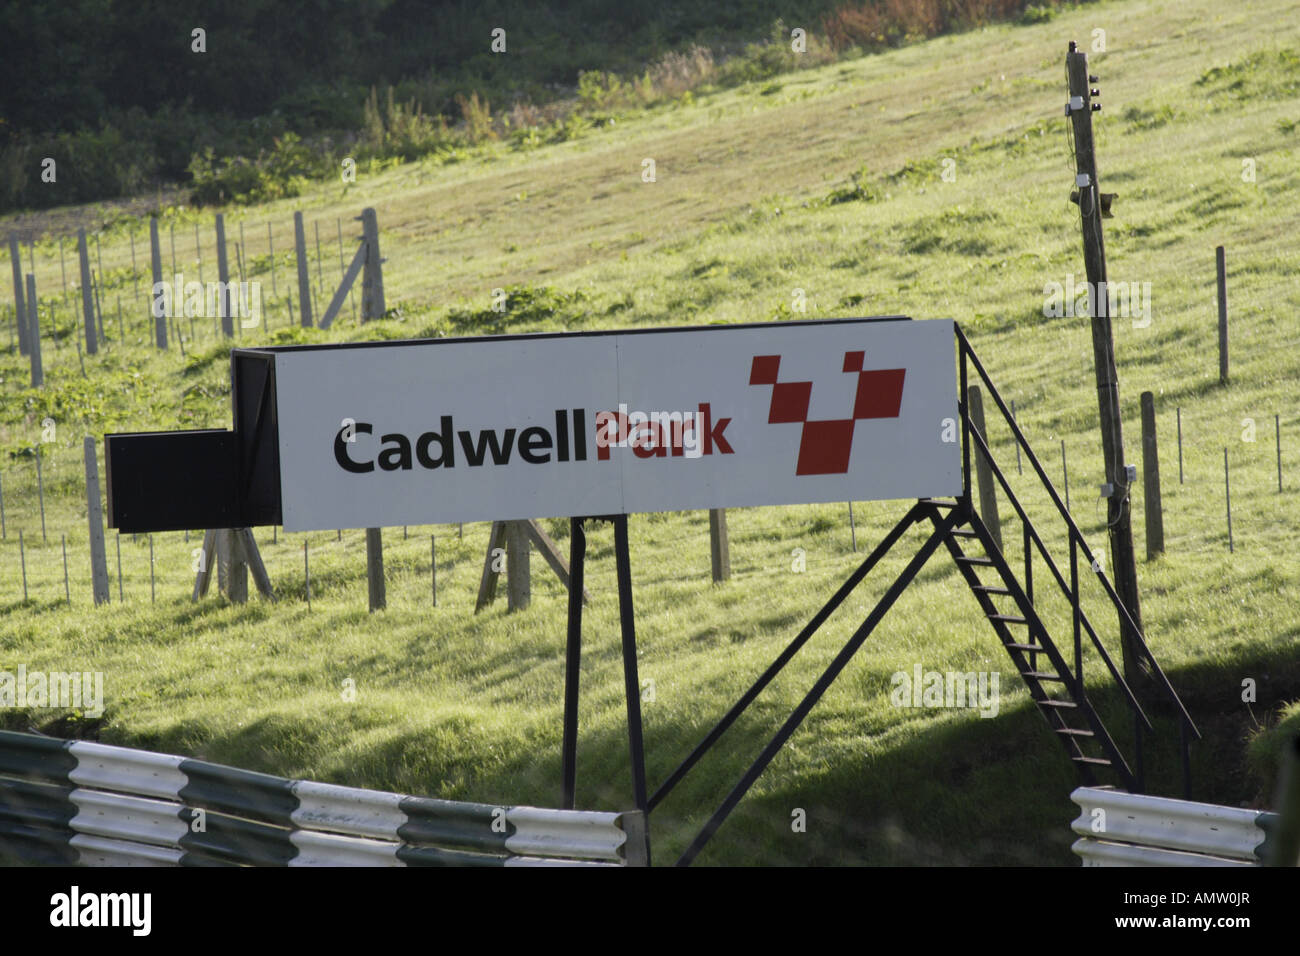 Cadwell Park Sign Stock Photo